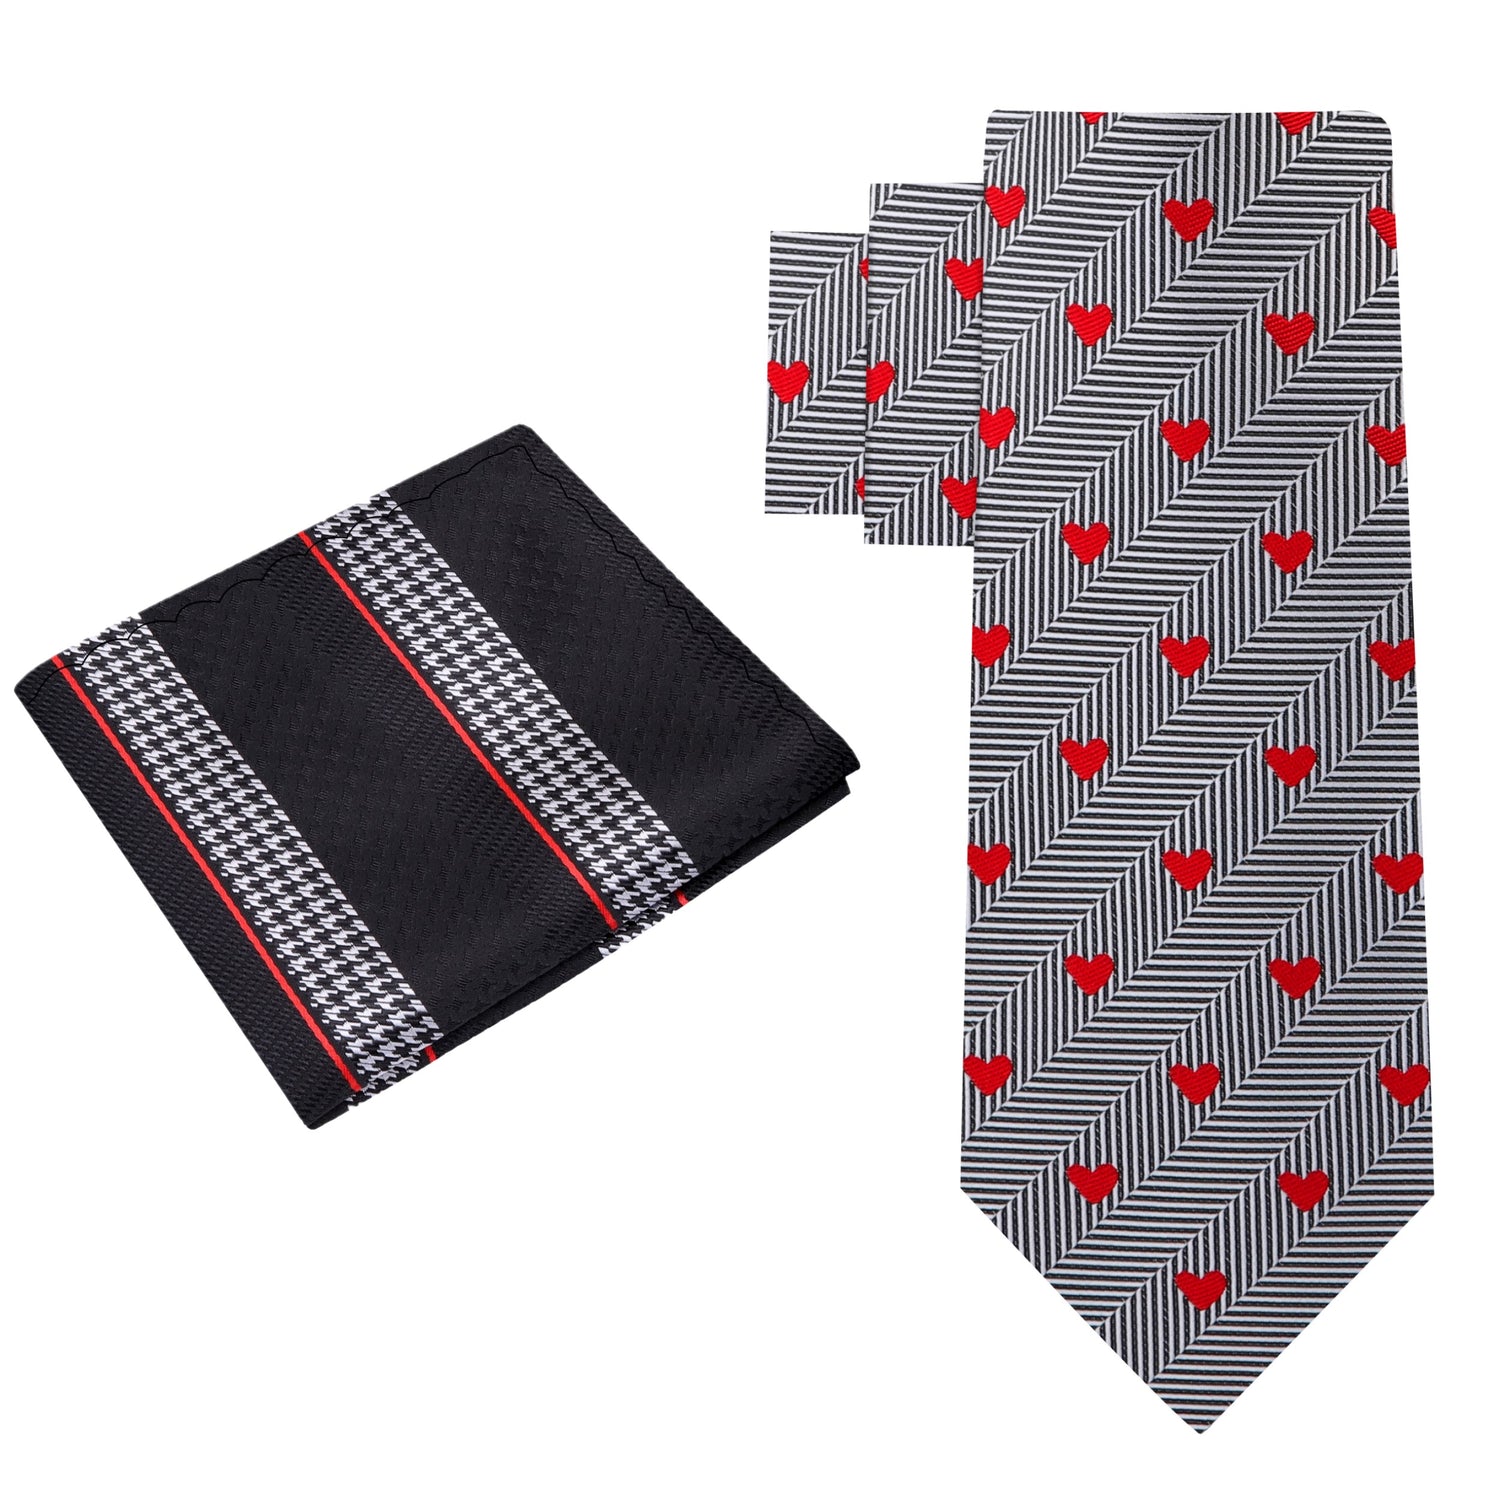 Alt View: Black, Red, Grey Herringbone and Hearts Necktie with Accenting Square